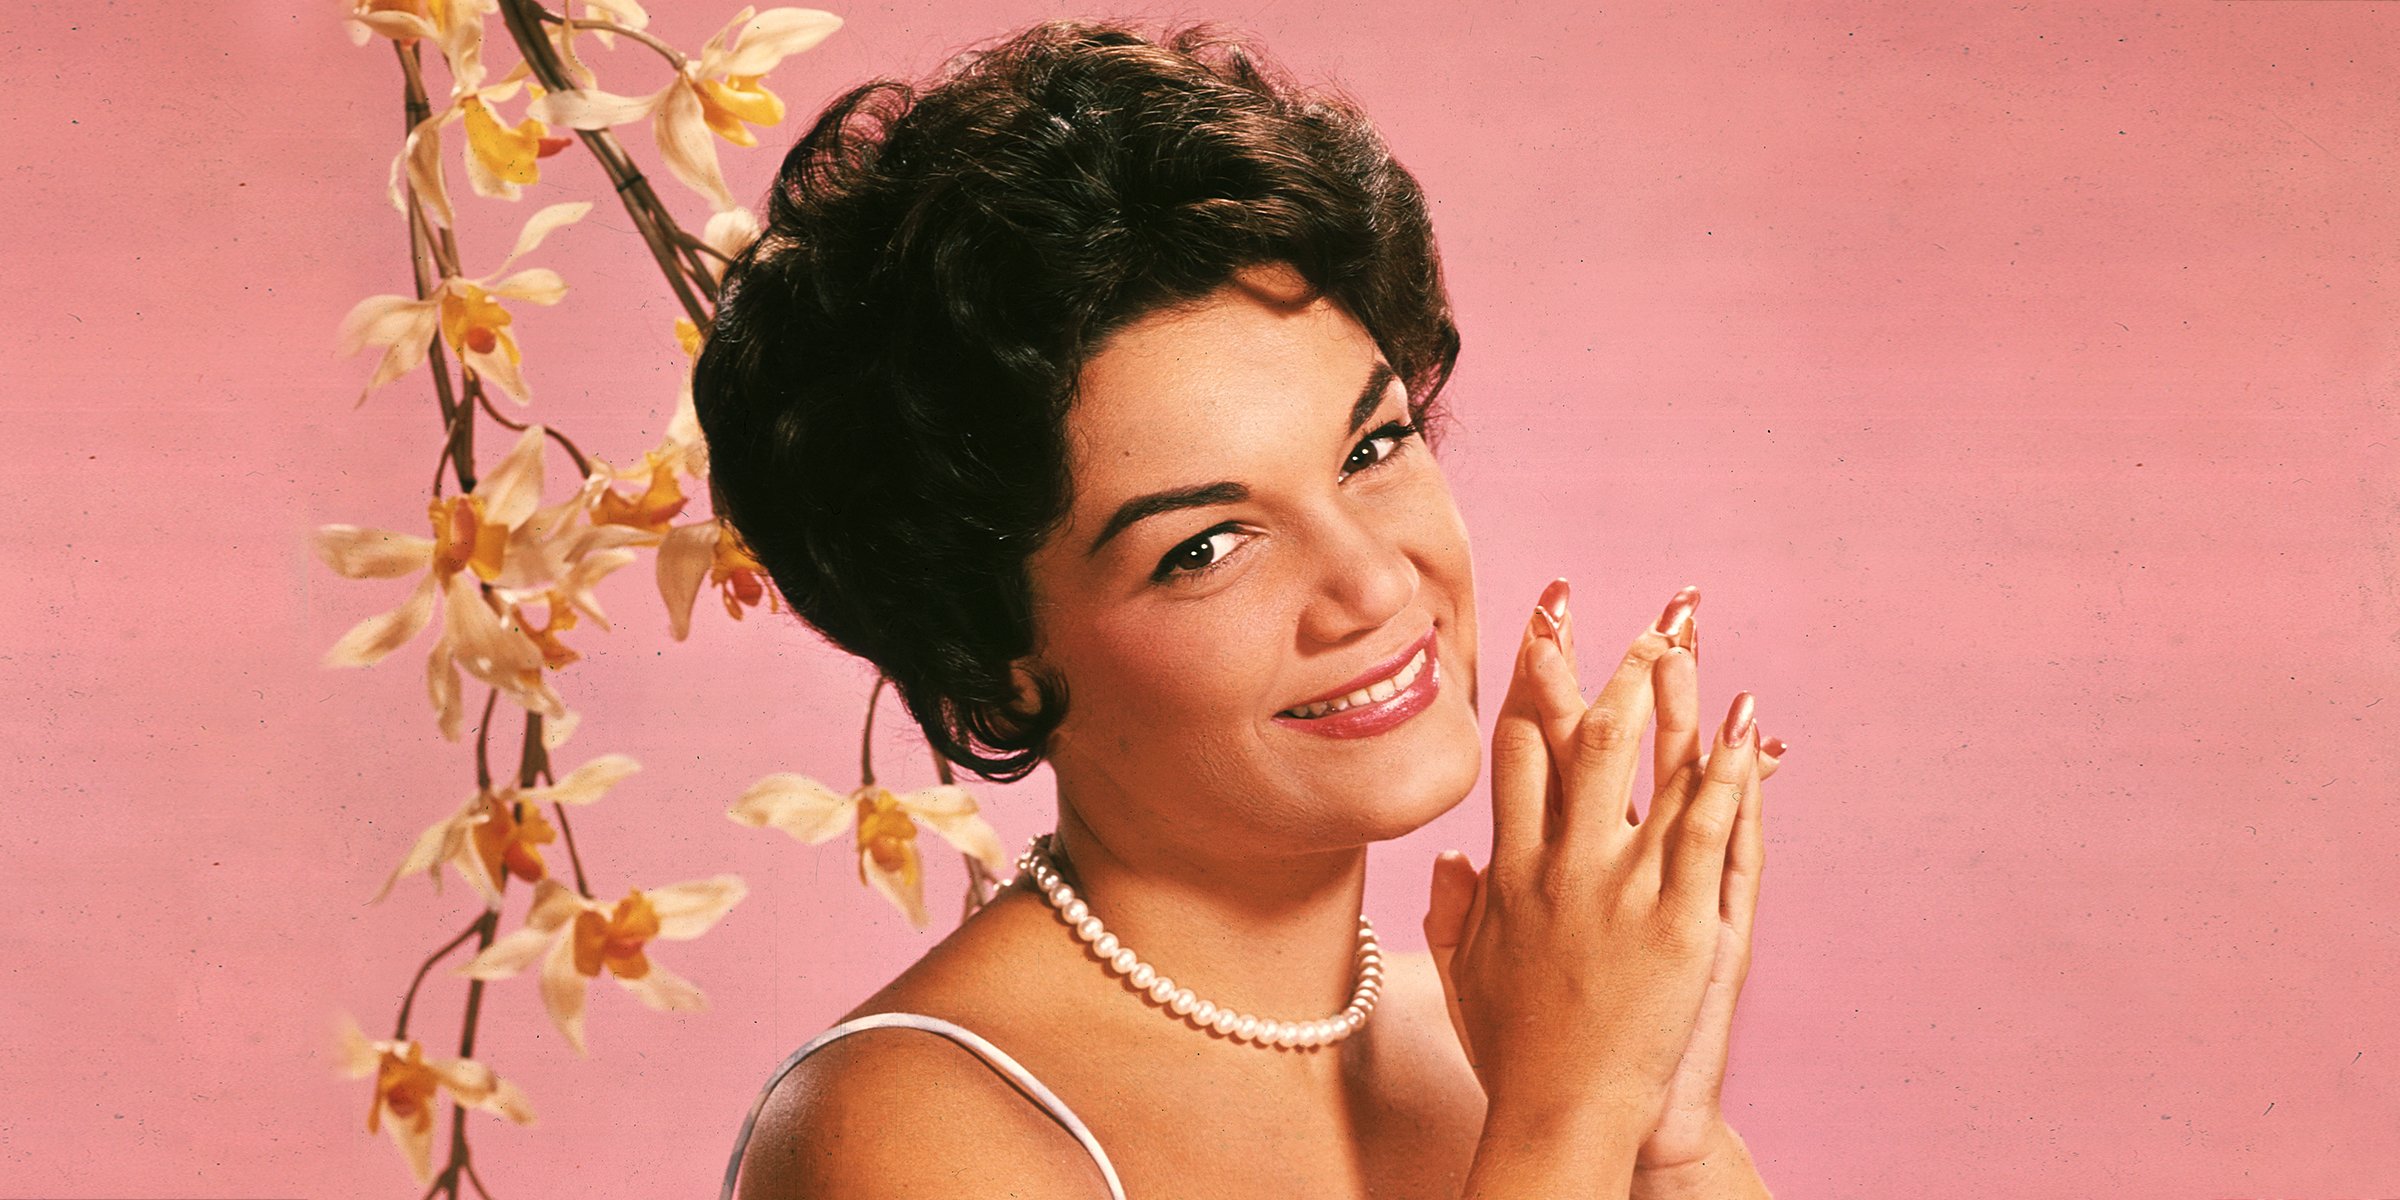 Connie Francis | Source: Getty Images